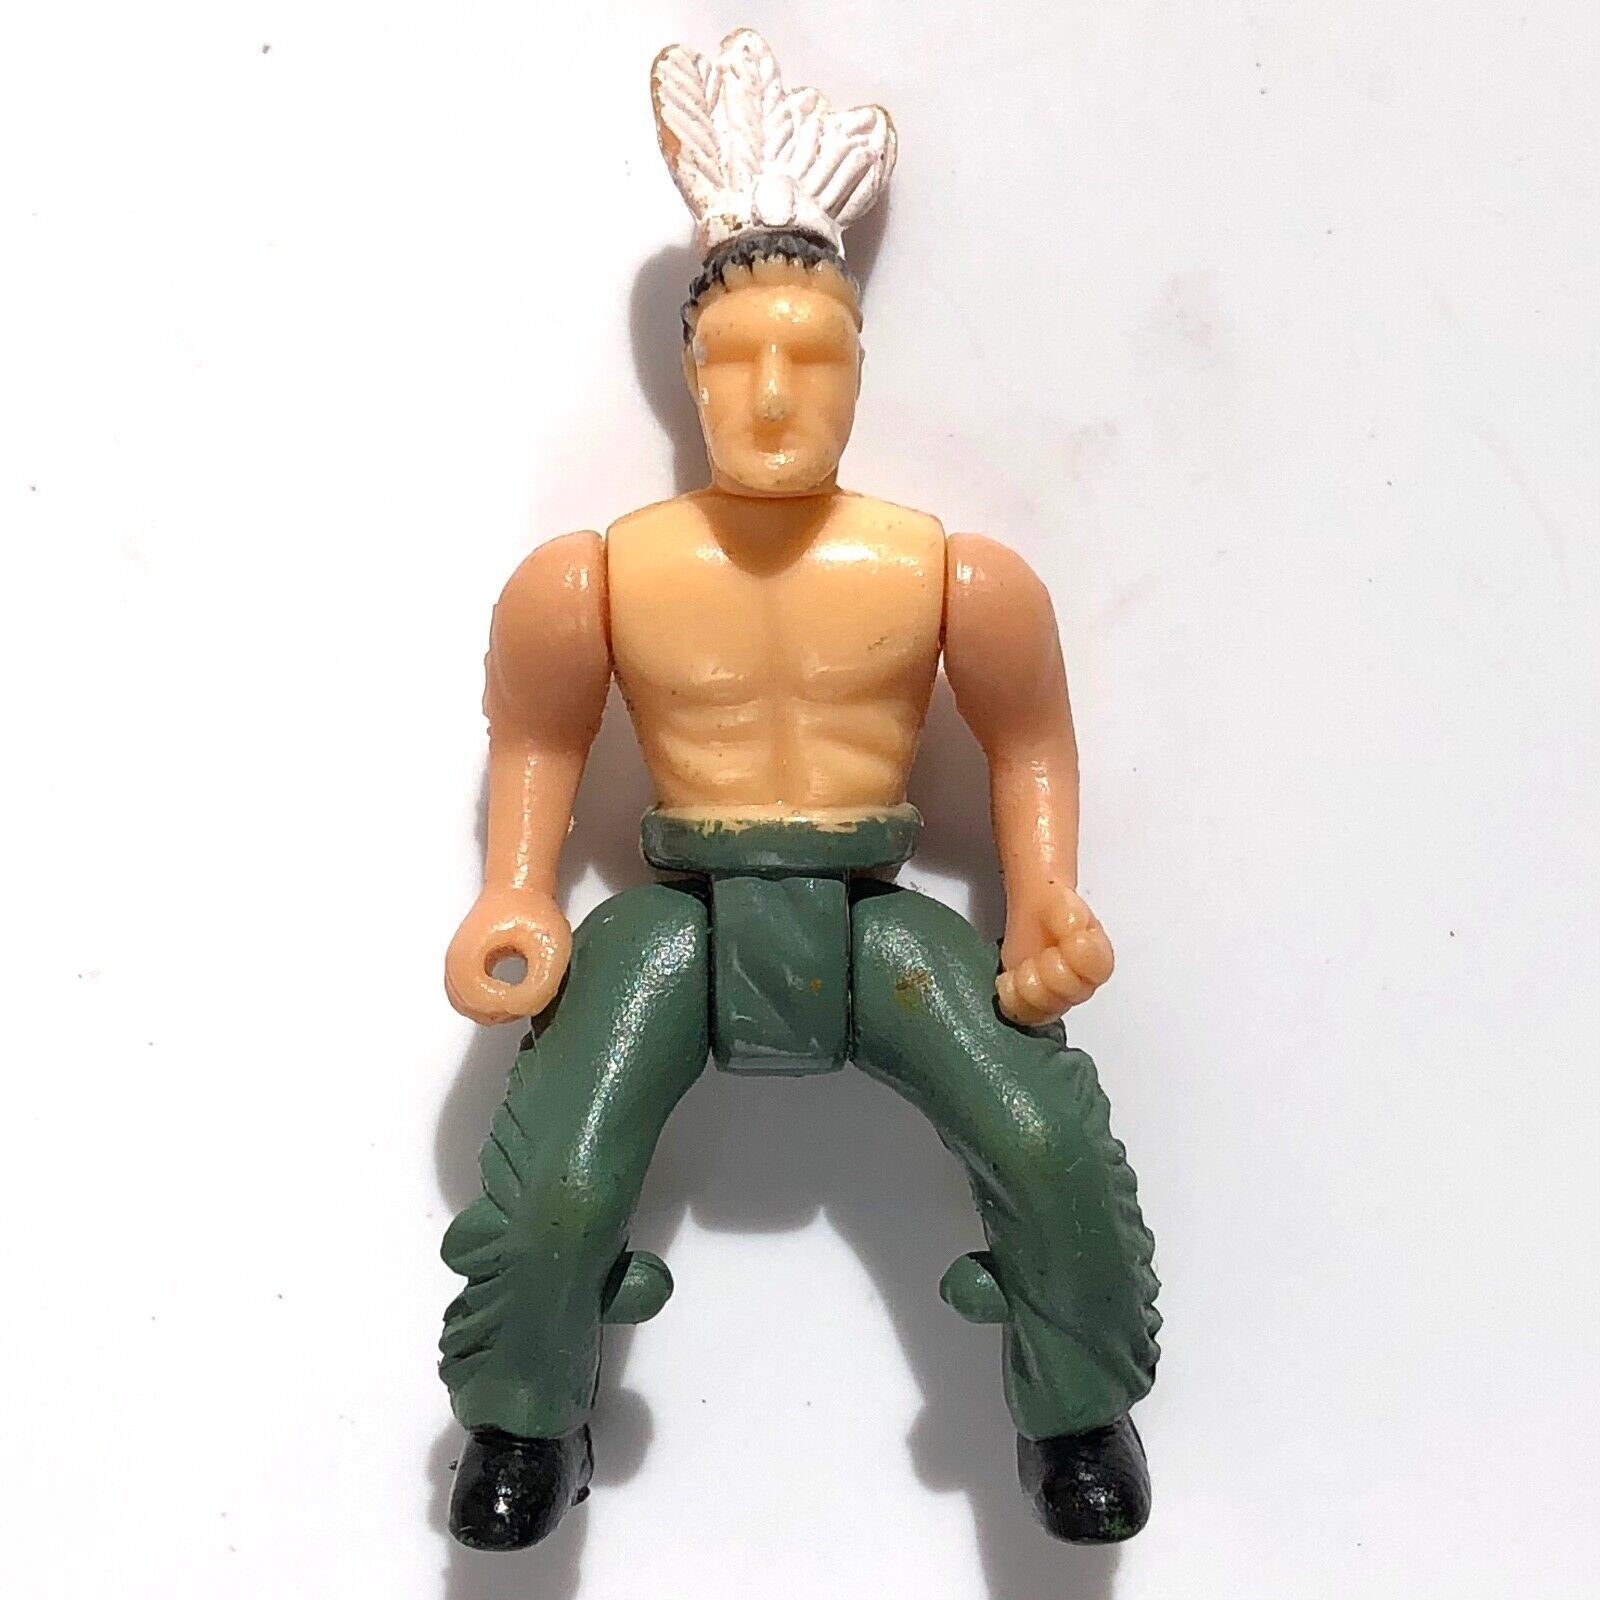 Native American Figurine from Major Western Soldier Cowboy Indian Playset vtg - $8.89